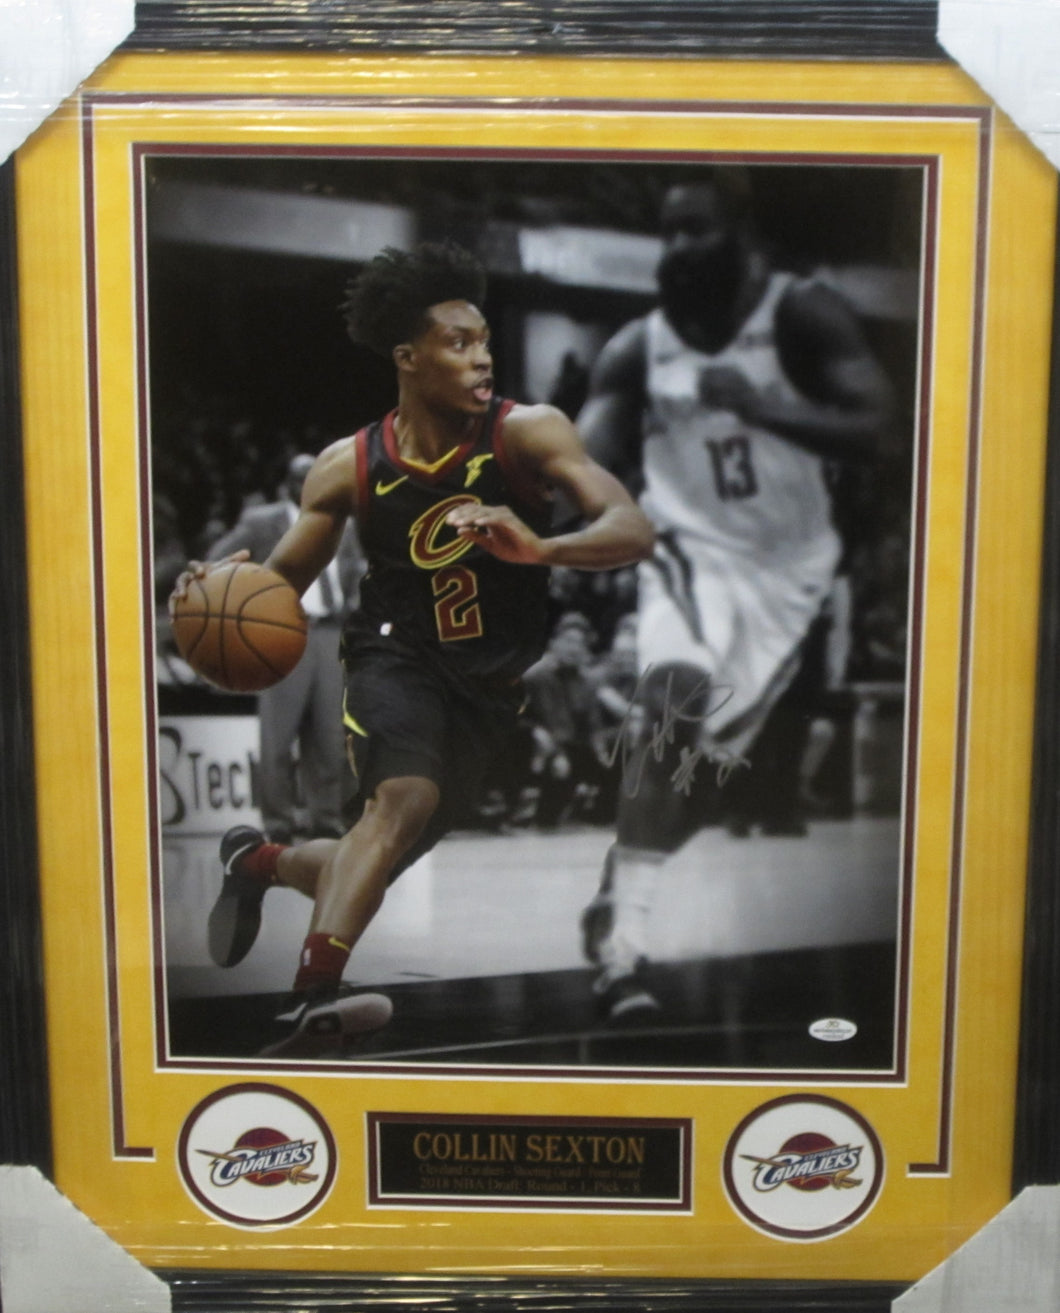 Cleveland Cavaliers Collin Sexton Signed 16x20 Photo Framed & Matted with COA